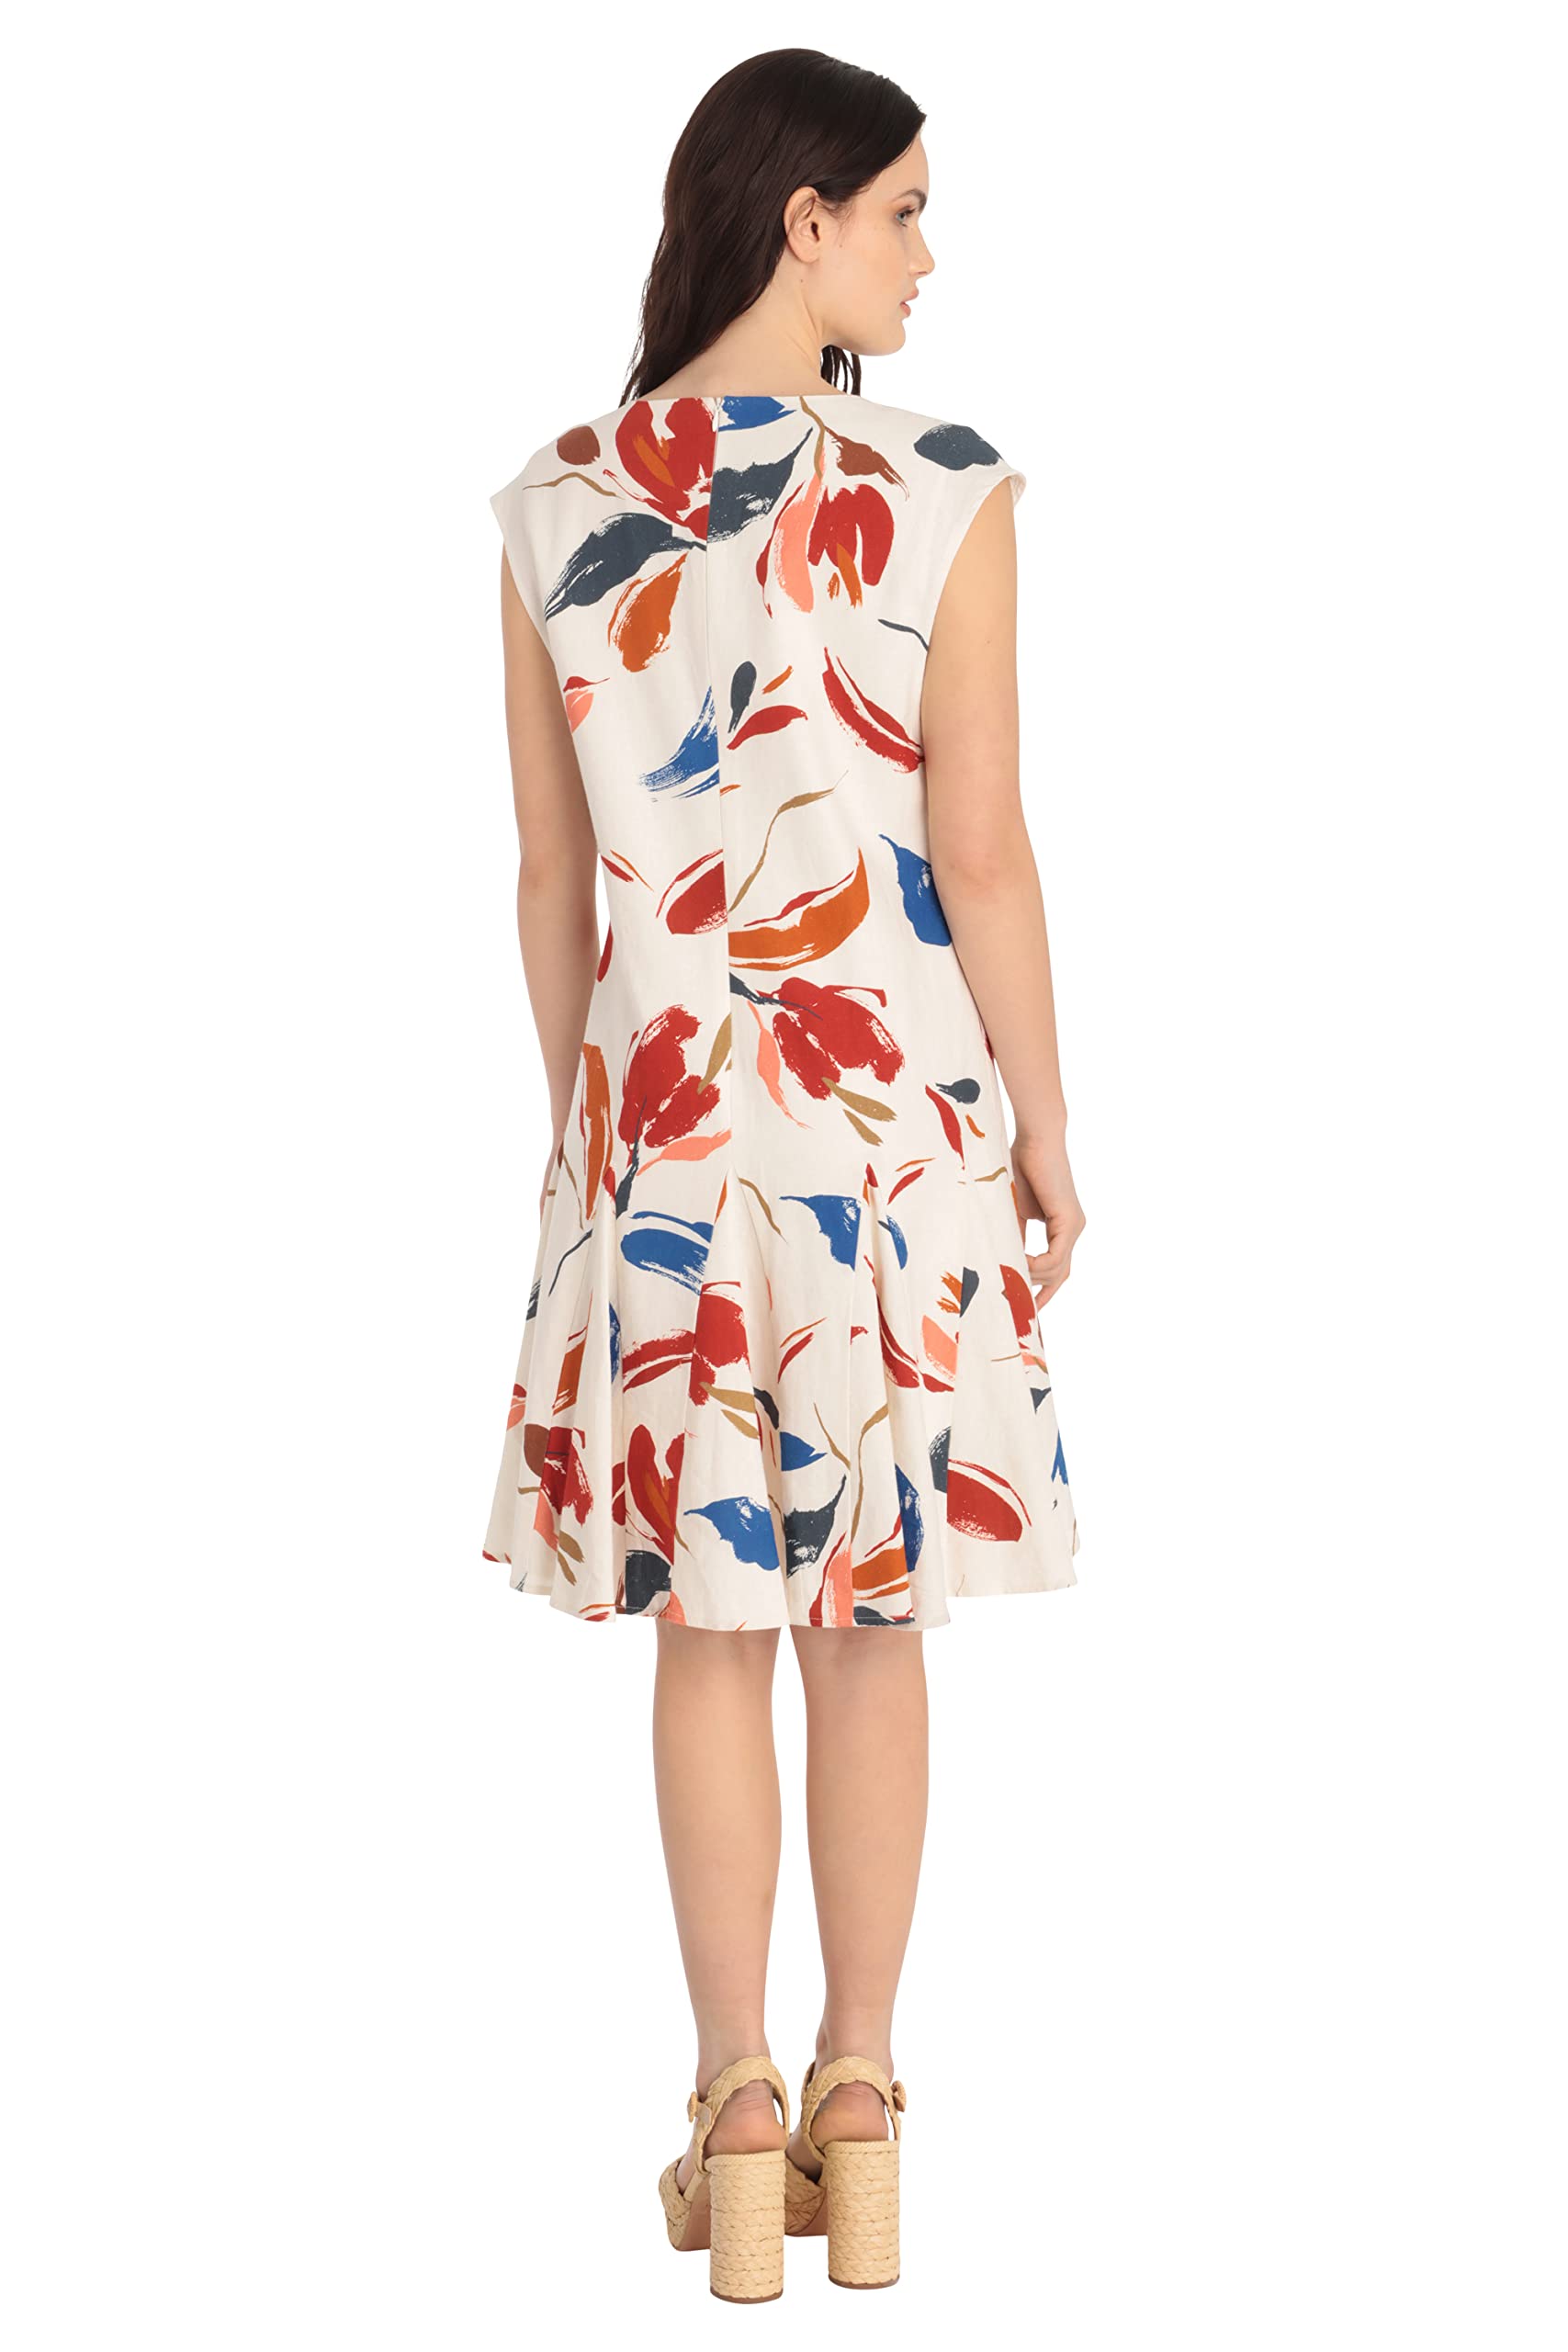 Maggy London Women's Floral Printed V-Neck Dress with Godets